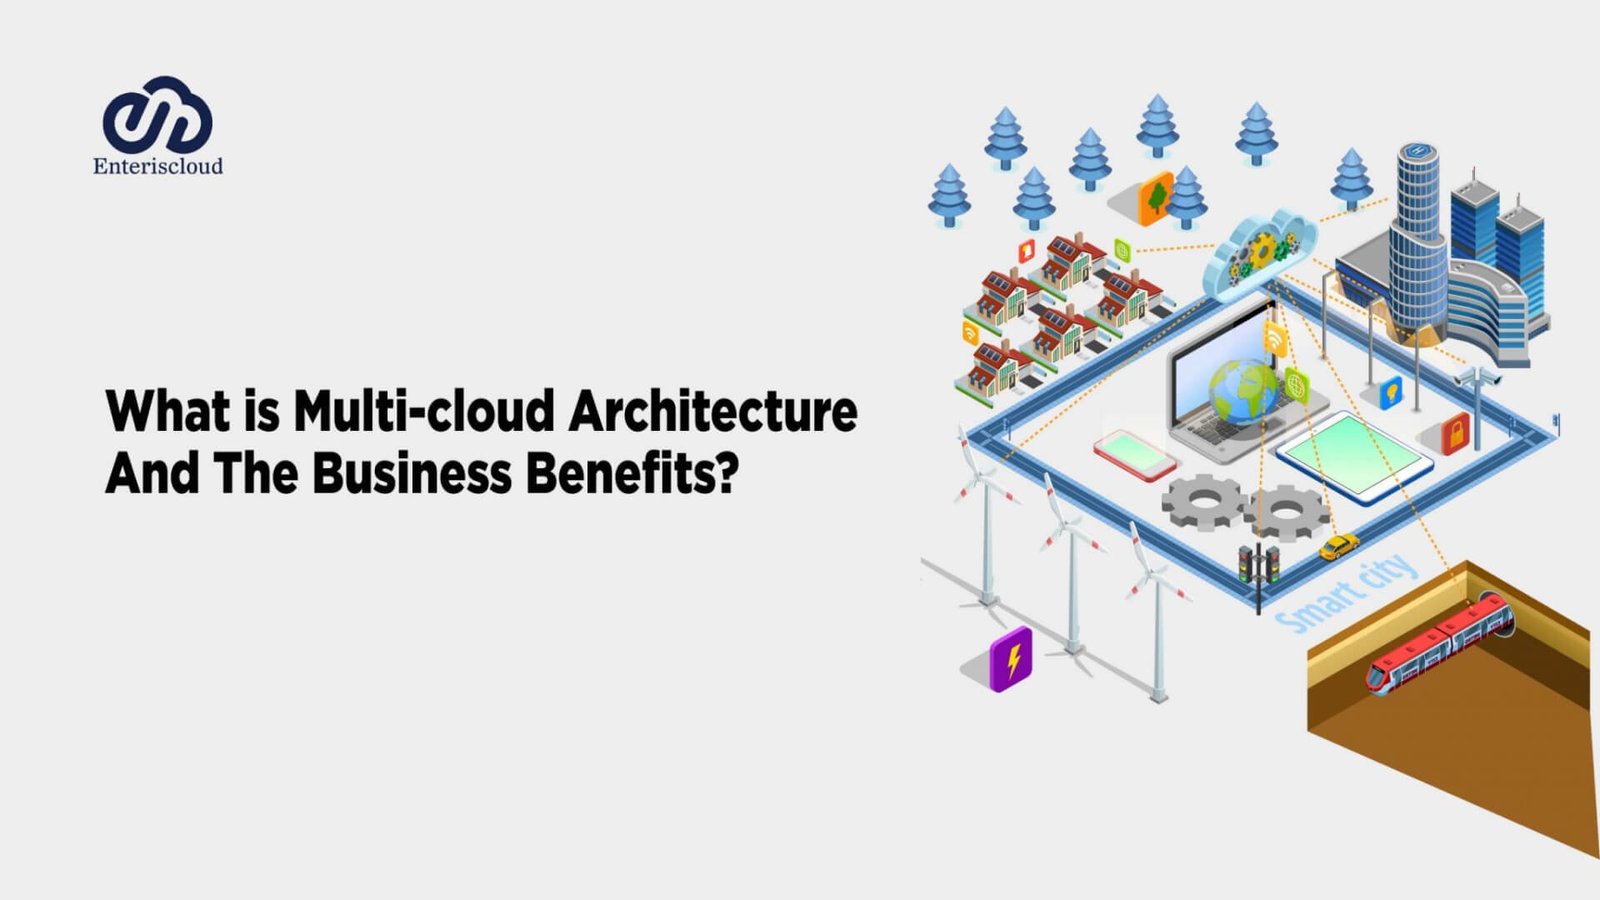 What is Multi-Cloud Architecture?